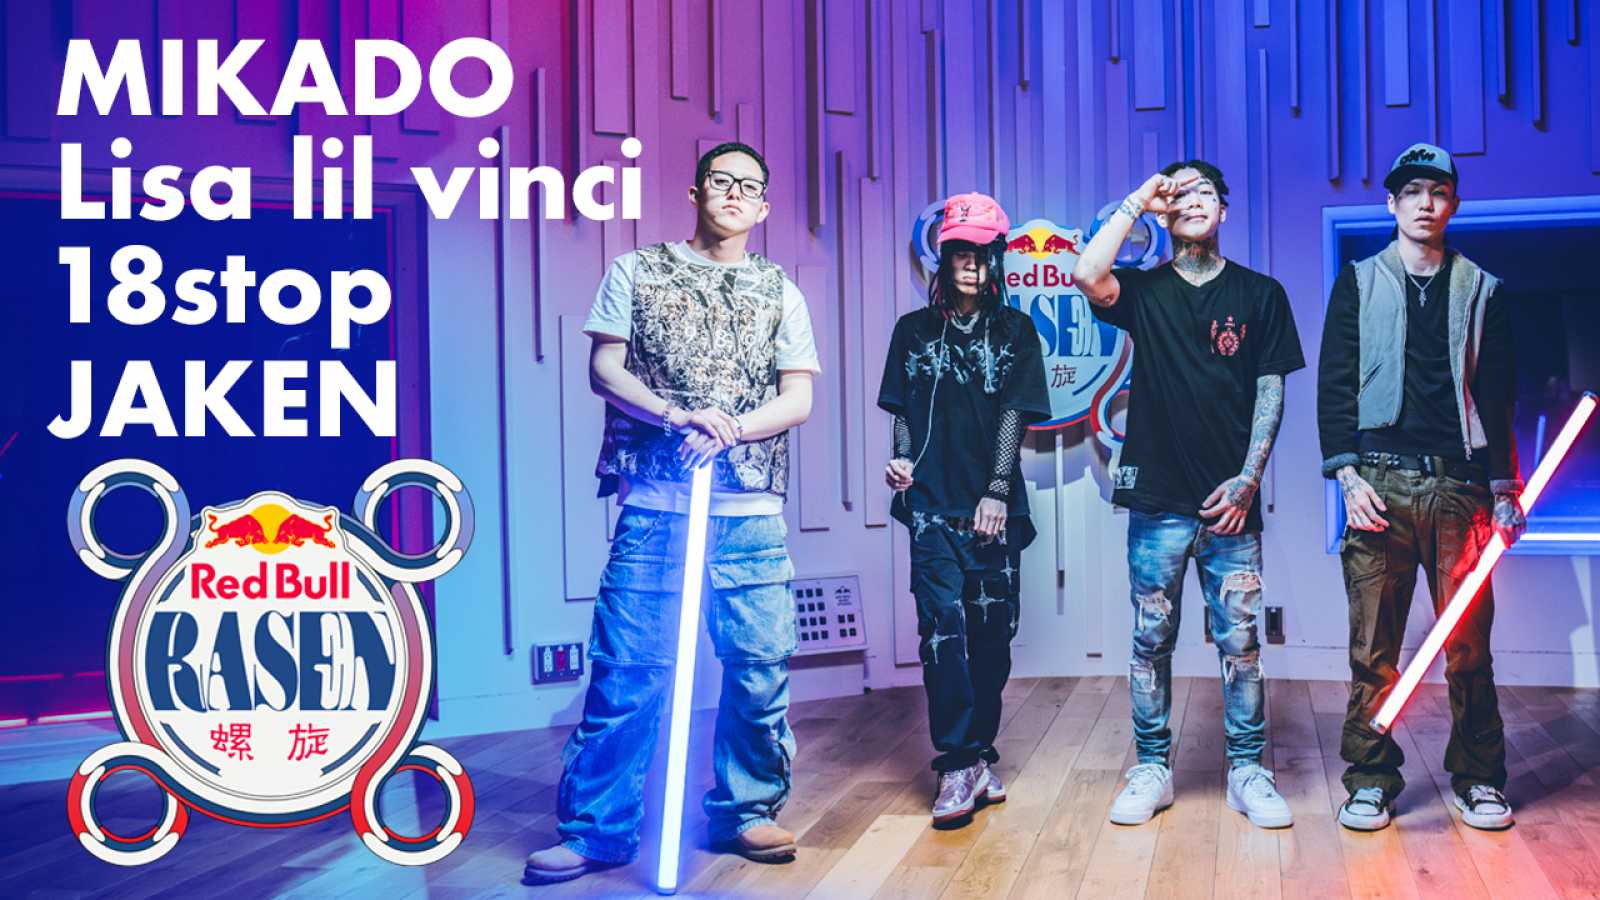 Red Bull Unveils New RASEN Video Featuring MIKADO, Lisa lil vinci, 18stop and JAKEN © Red Bull. All rights reserved.